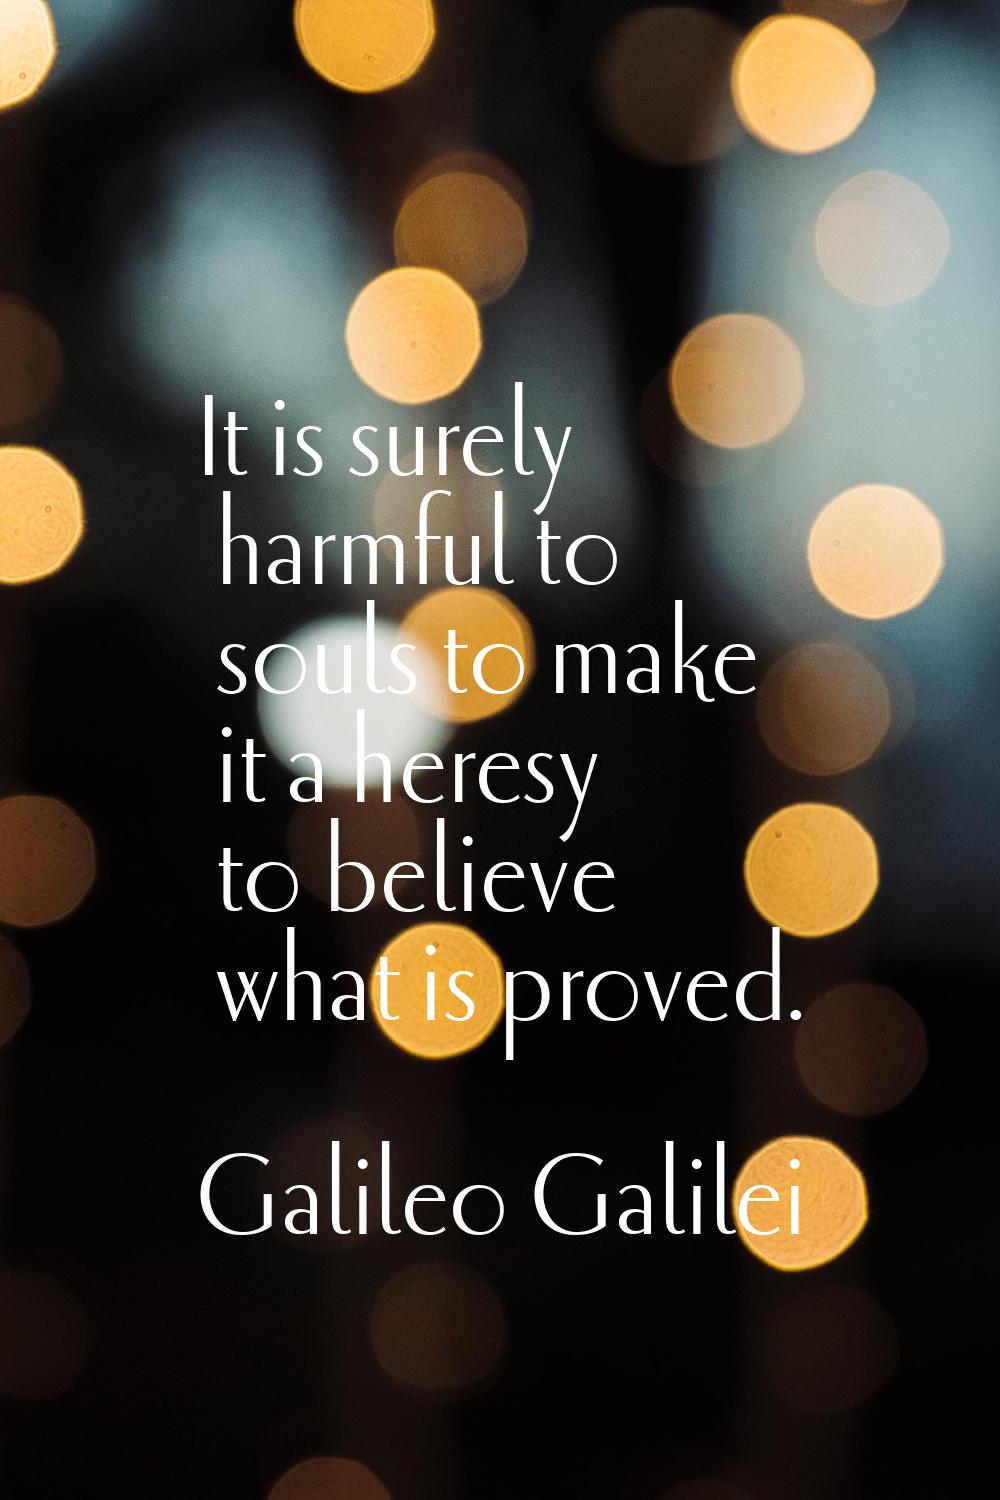 It is surely harmful to souls to make it a heresy to believe what is proved.